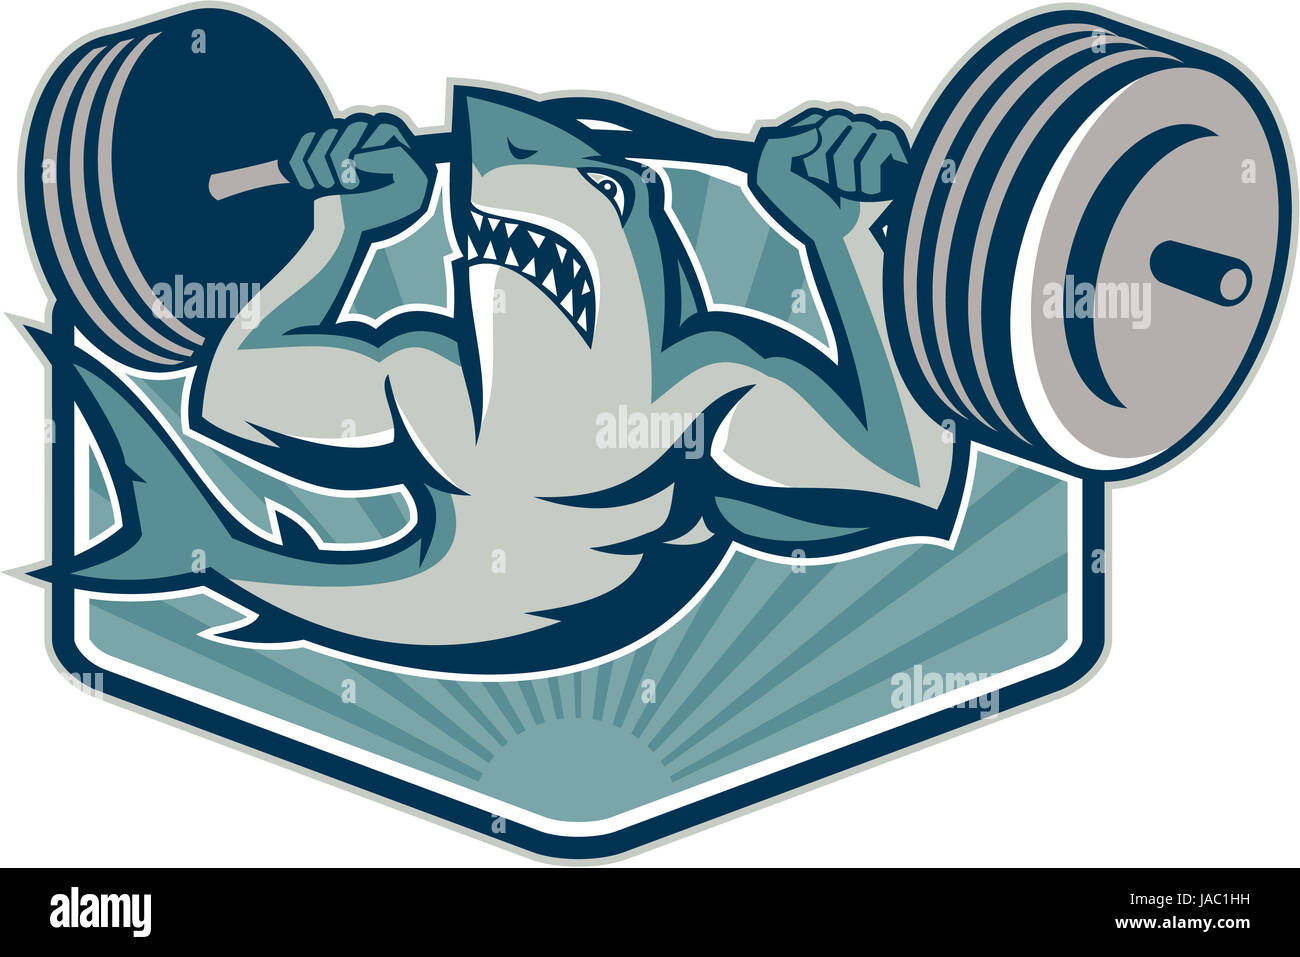 Illustration of a shark weightlifter lifting weights barbell viewed from front done in retro style. Stock Photo